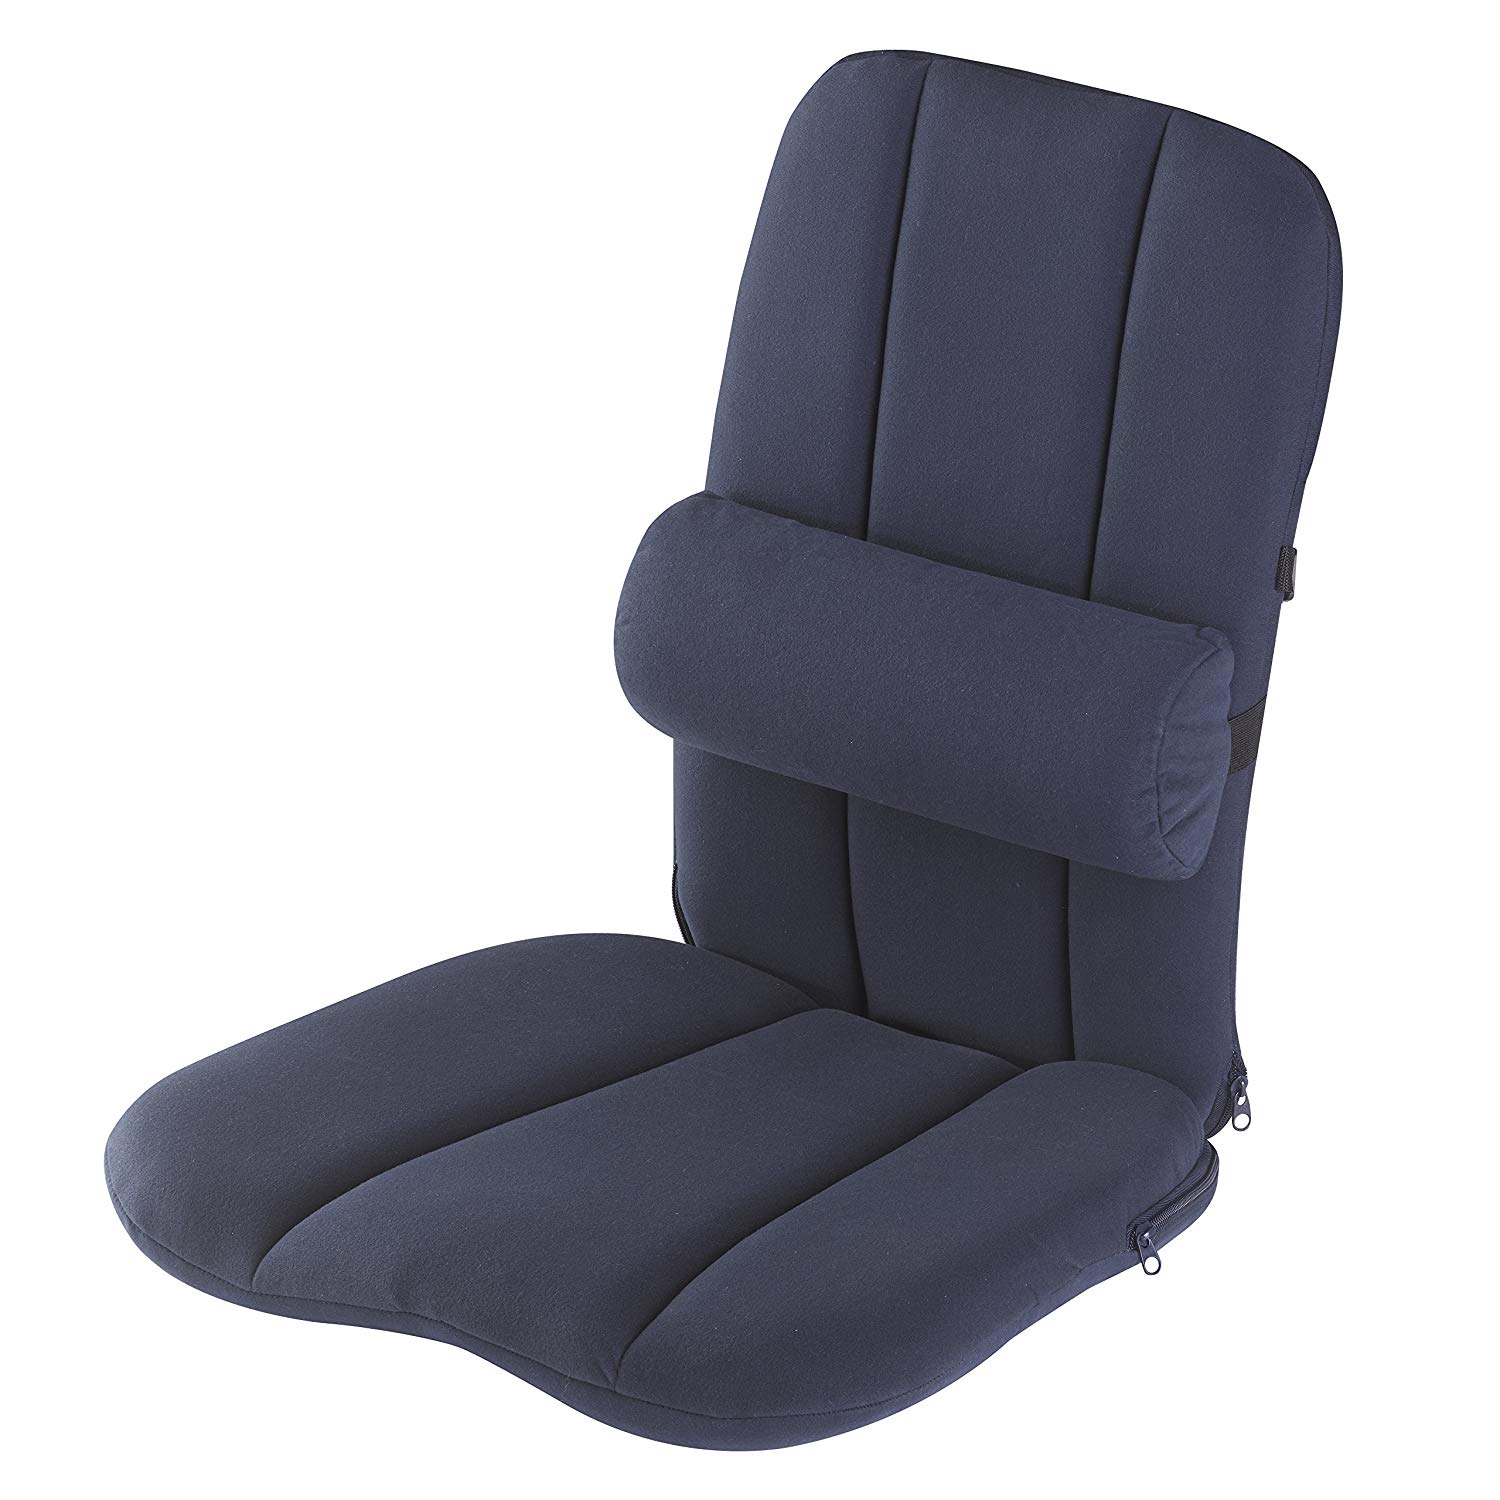 Portable Lumbar Support For Office Chair - Online Portable Lumbar